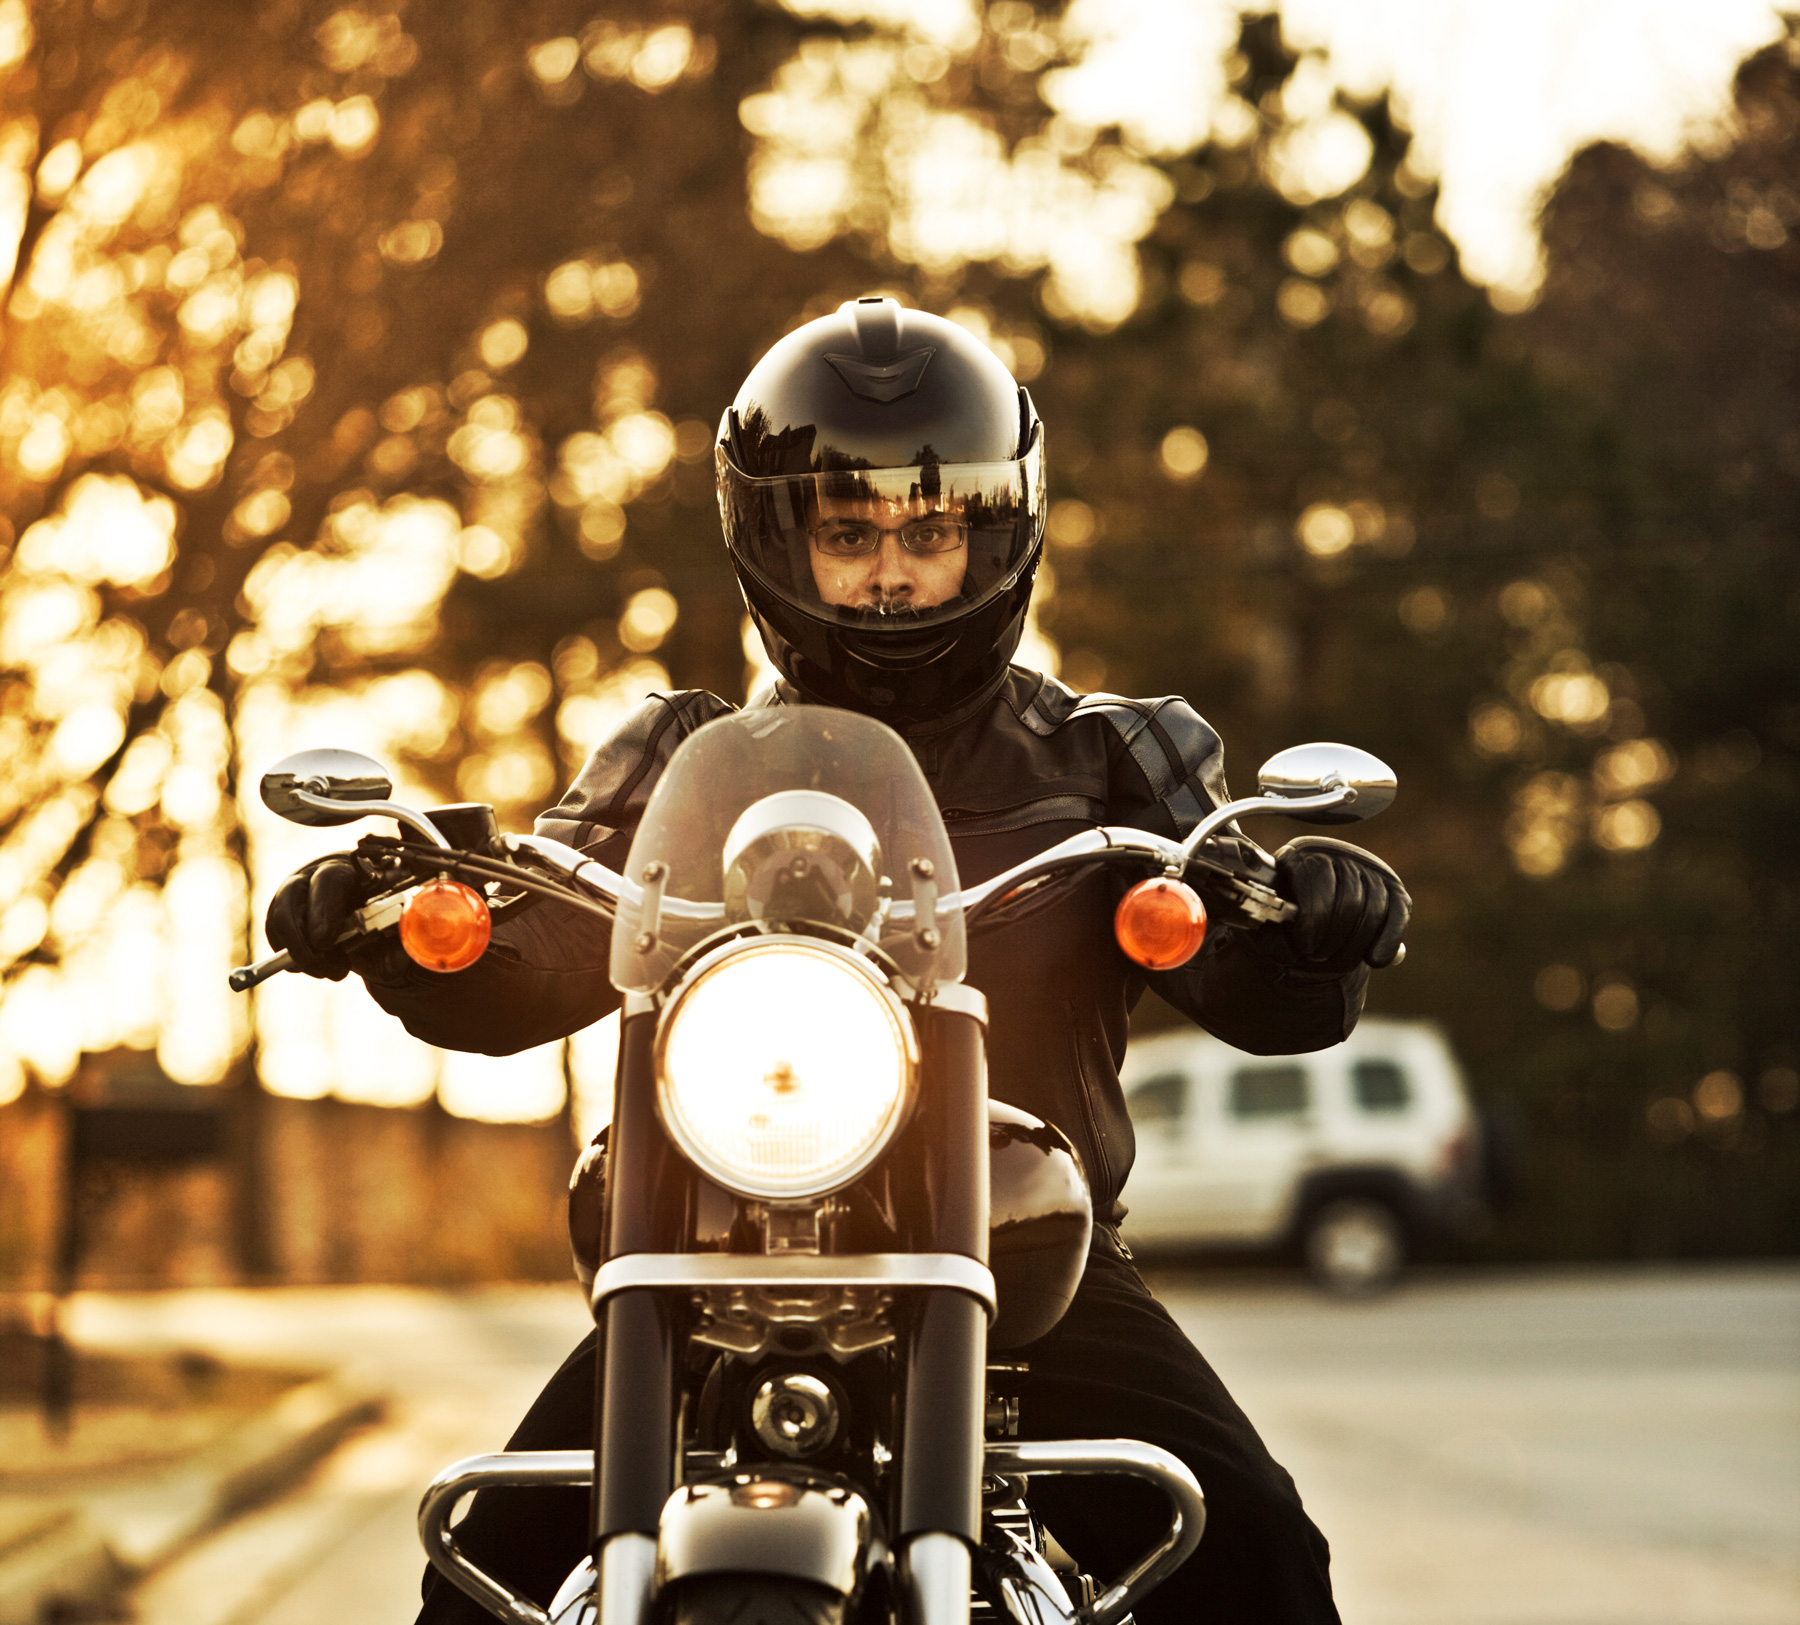   Leading Motorcycle Safety  